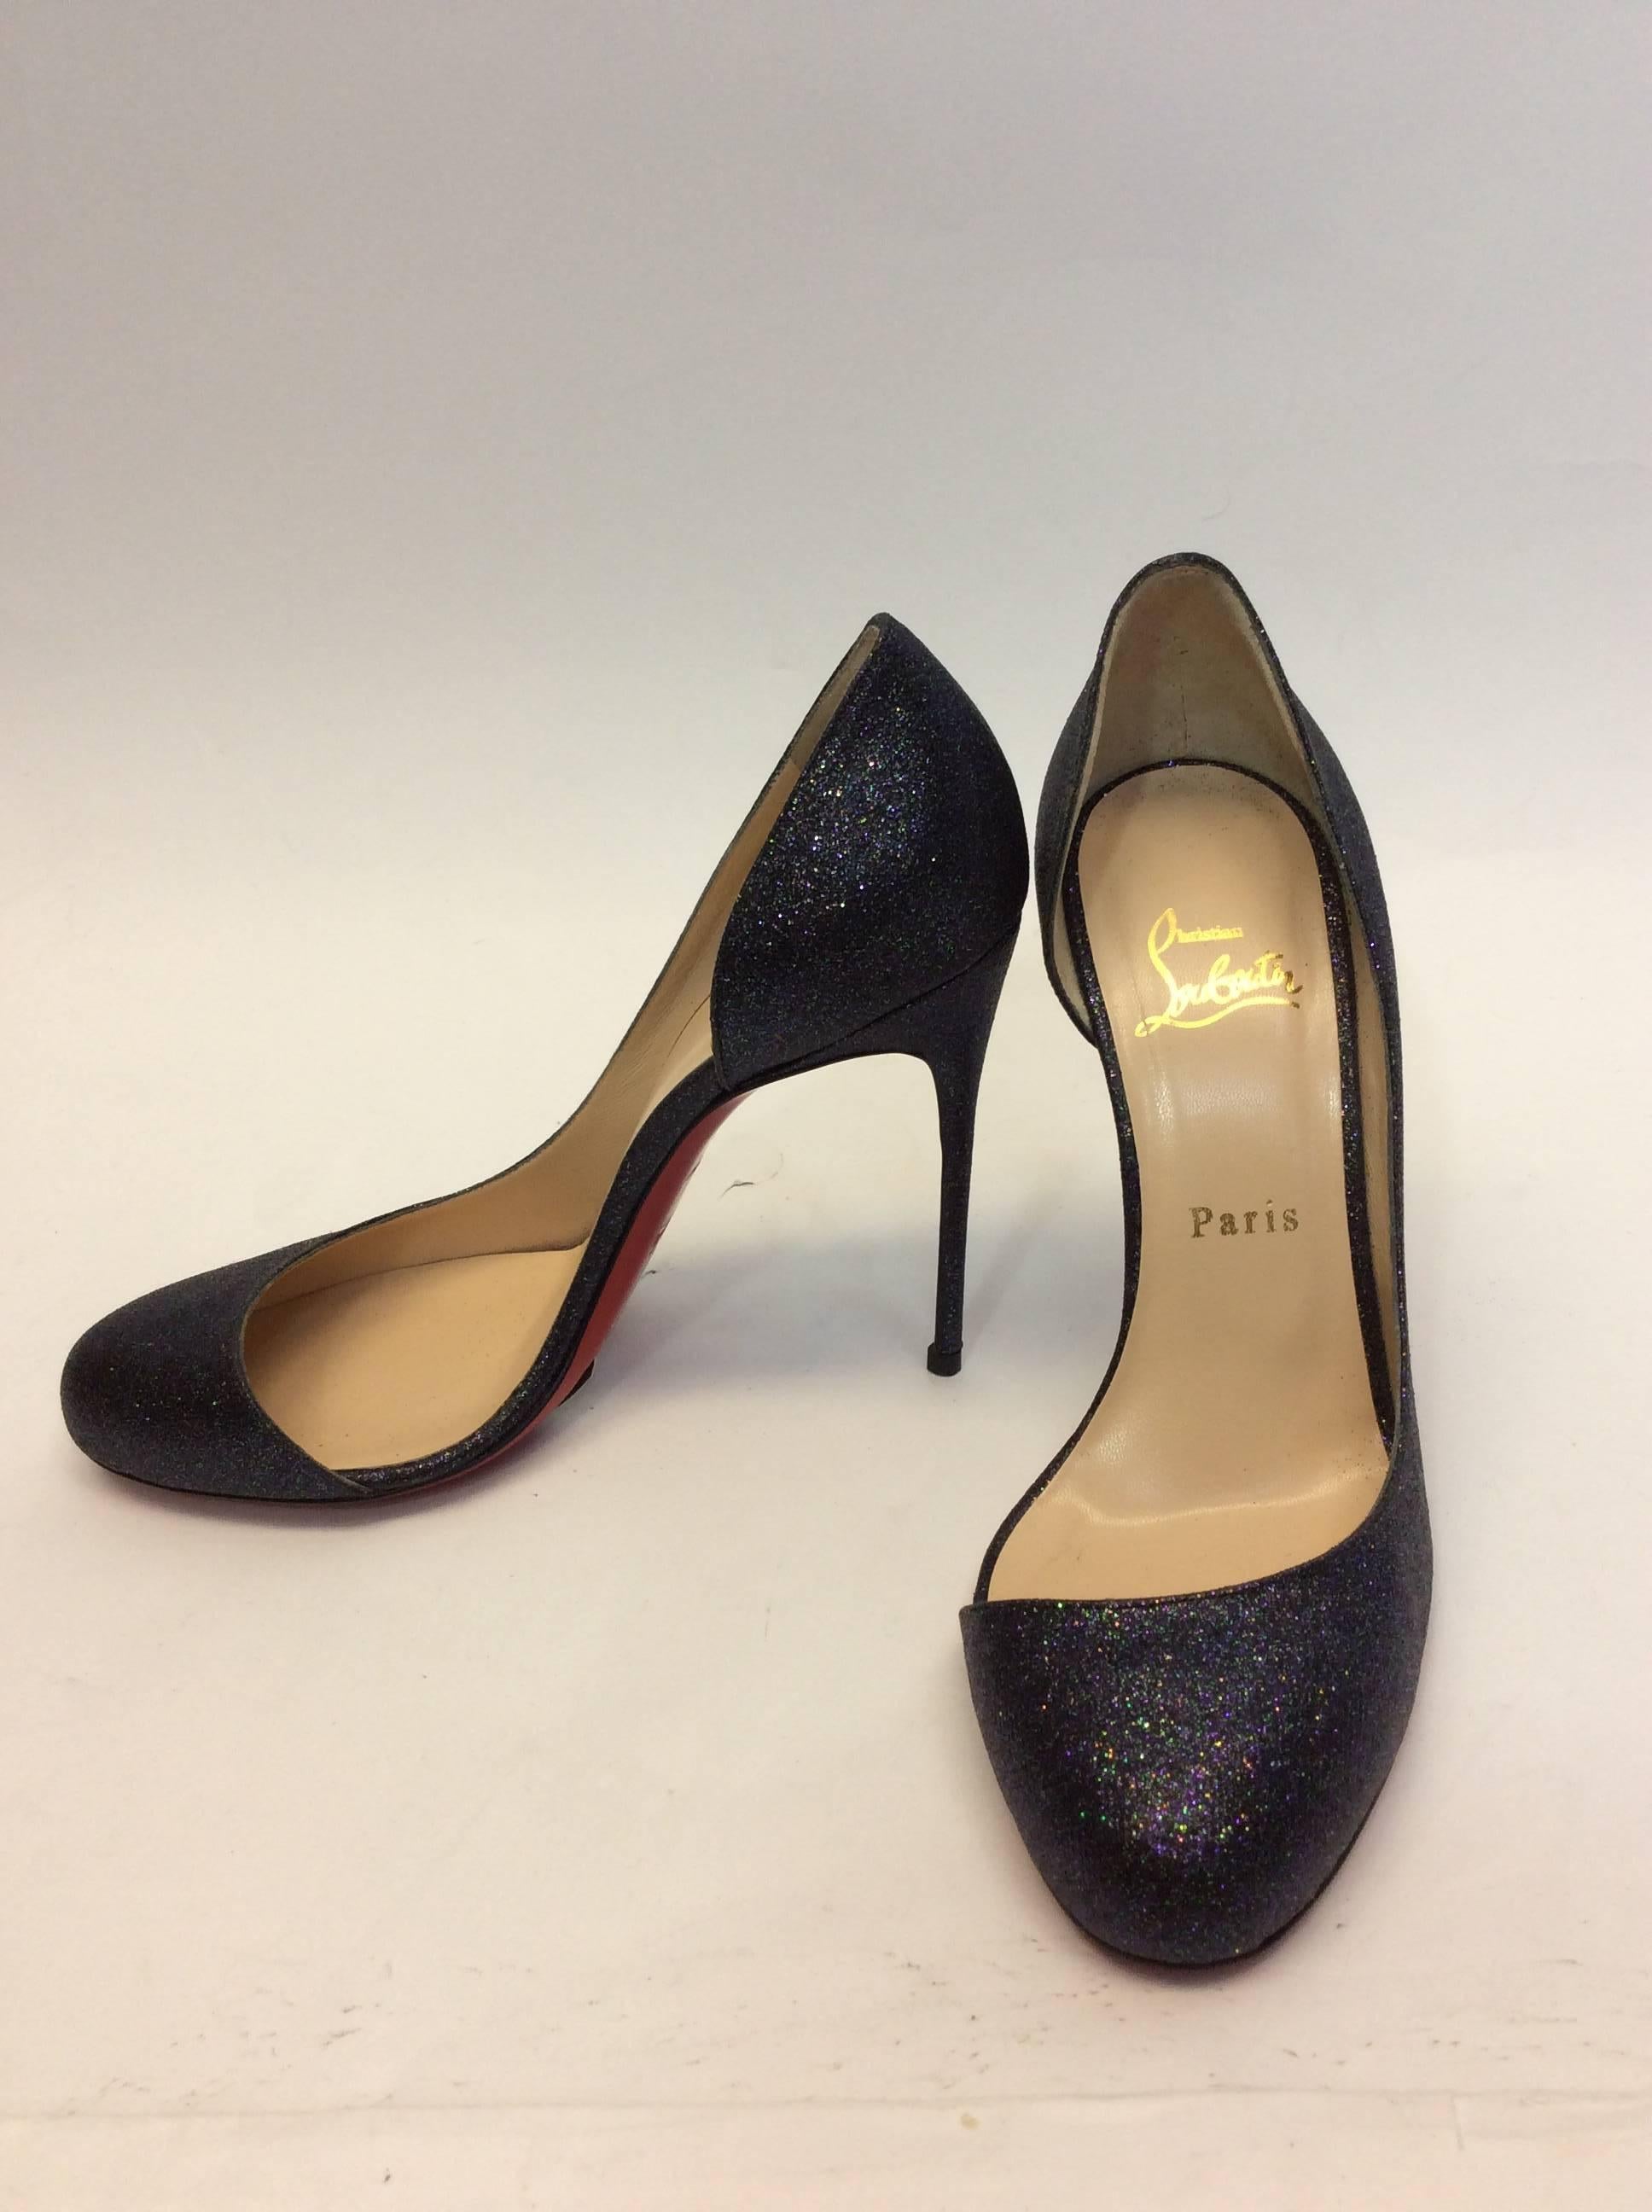 Blue Toned Glitter Pumps
4.5 inch heel
3.5 inch sole width
Red bottoms intact
Multicolored glitter texture
Size 38 (equates to US 7.5)
Textured upper with leather lining